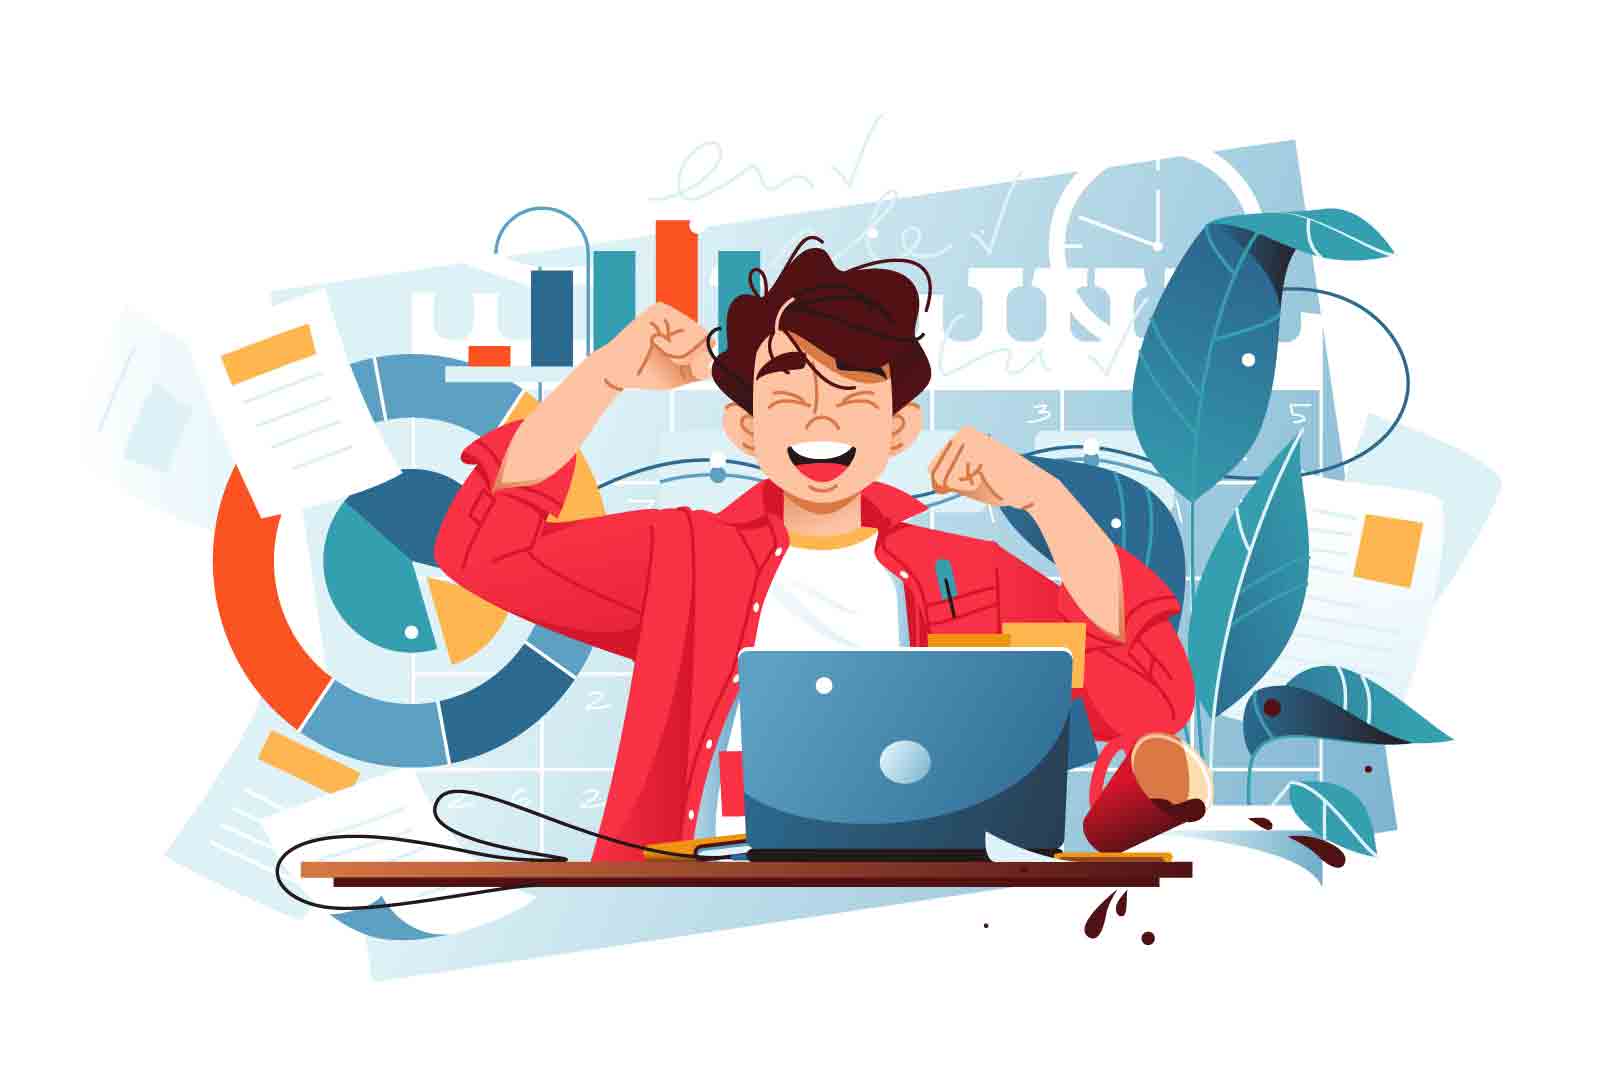 Man celebrates successful work with a big smile, vector illustration. Surrounded by charts, graphs, and documents.